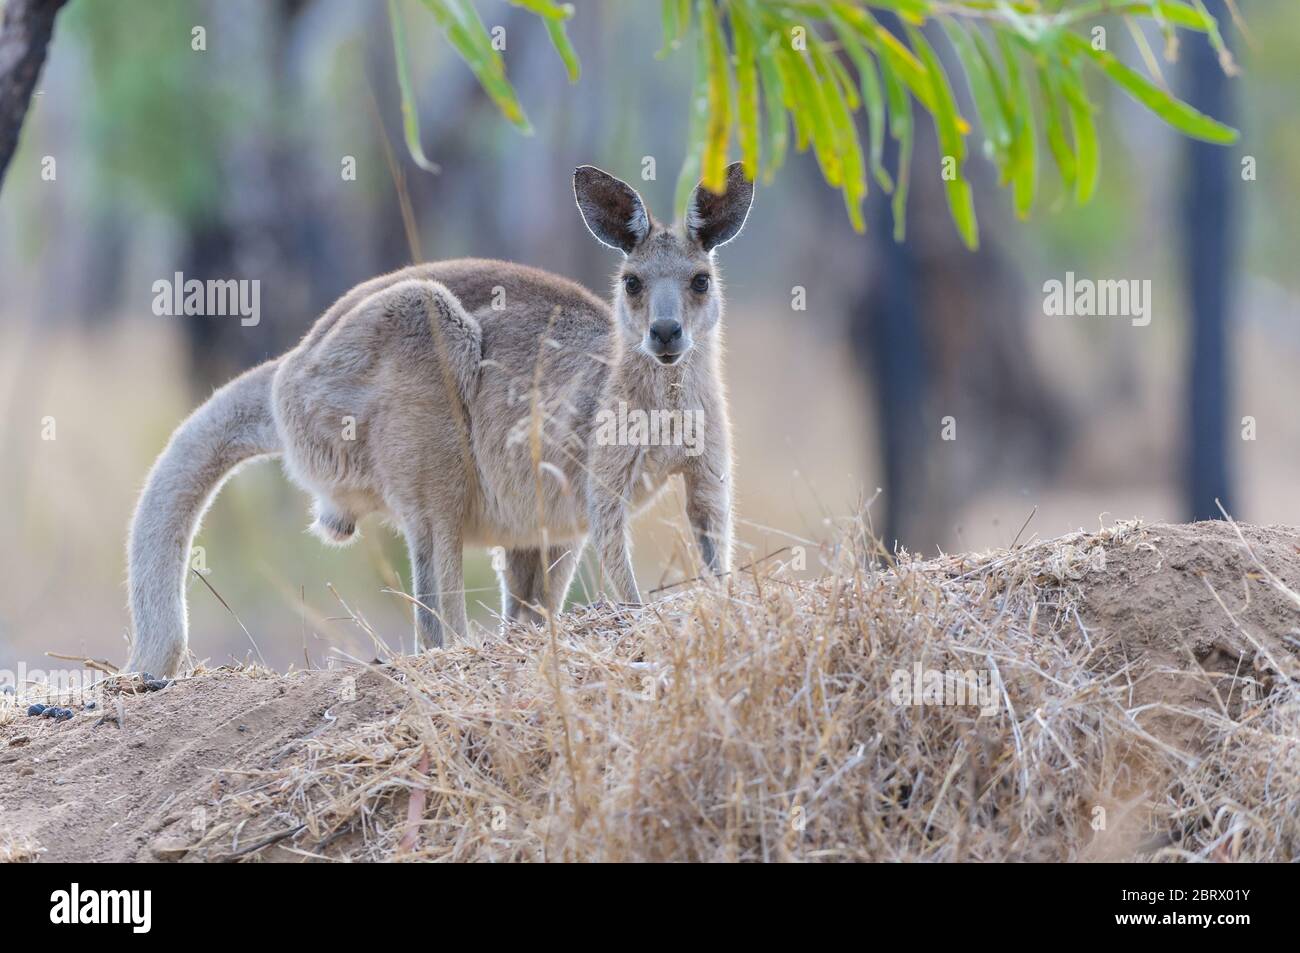 A young female Eastern grey kangaroo at Undarra, outback Australia crouches atop a grassy hillock in the open savannah woodland framed by gum leaves. Stock Photo